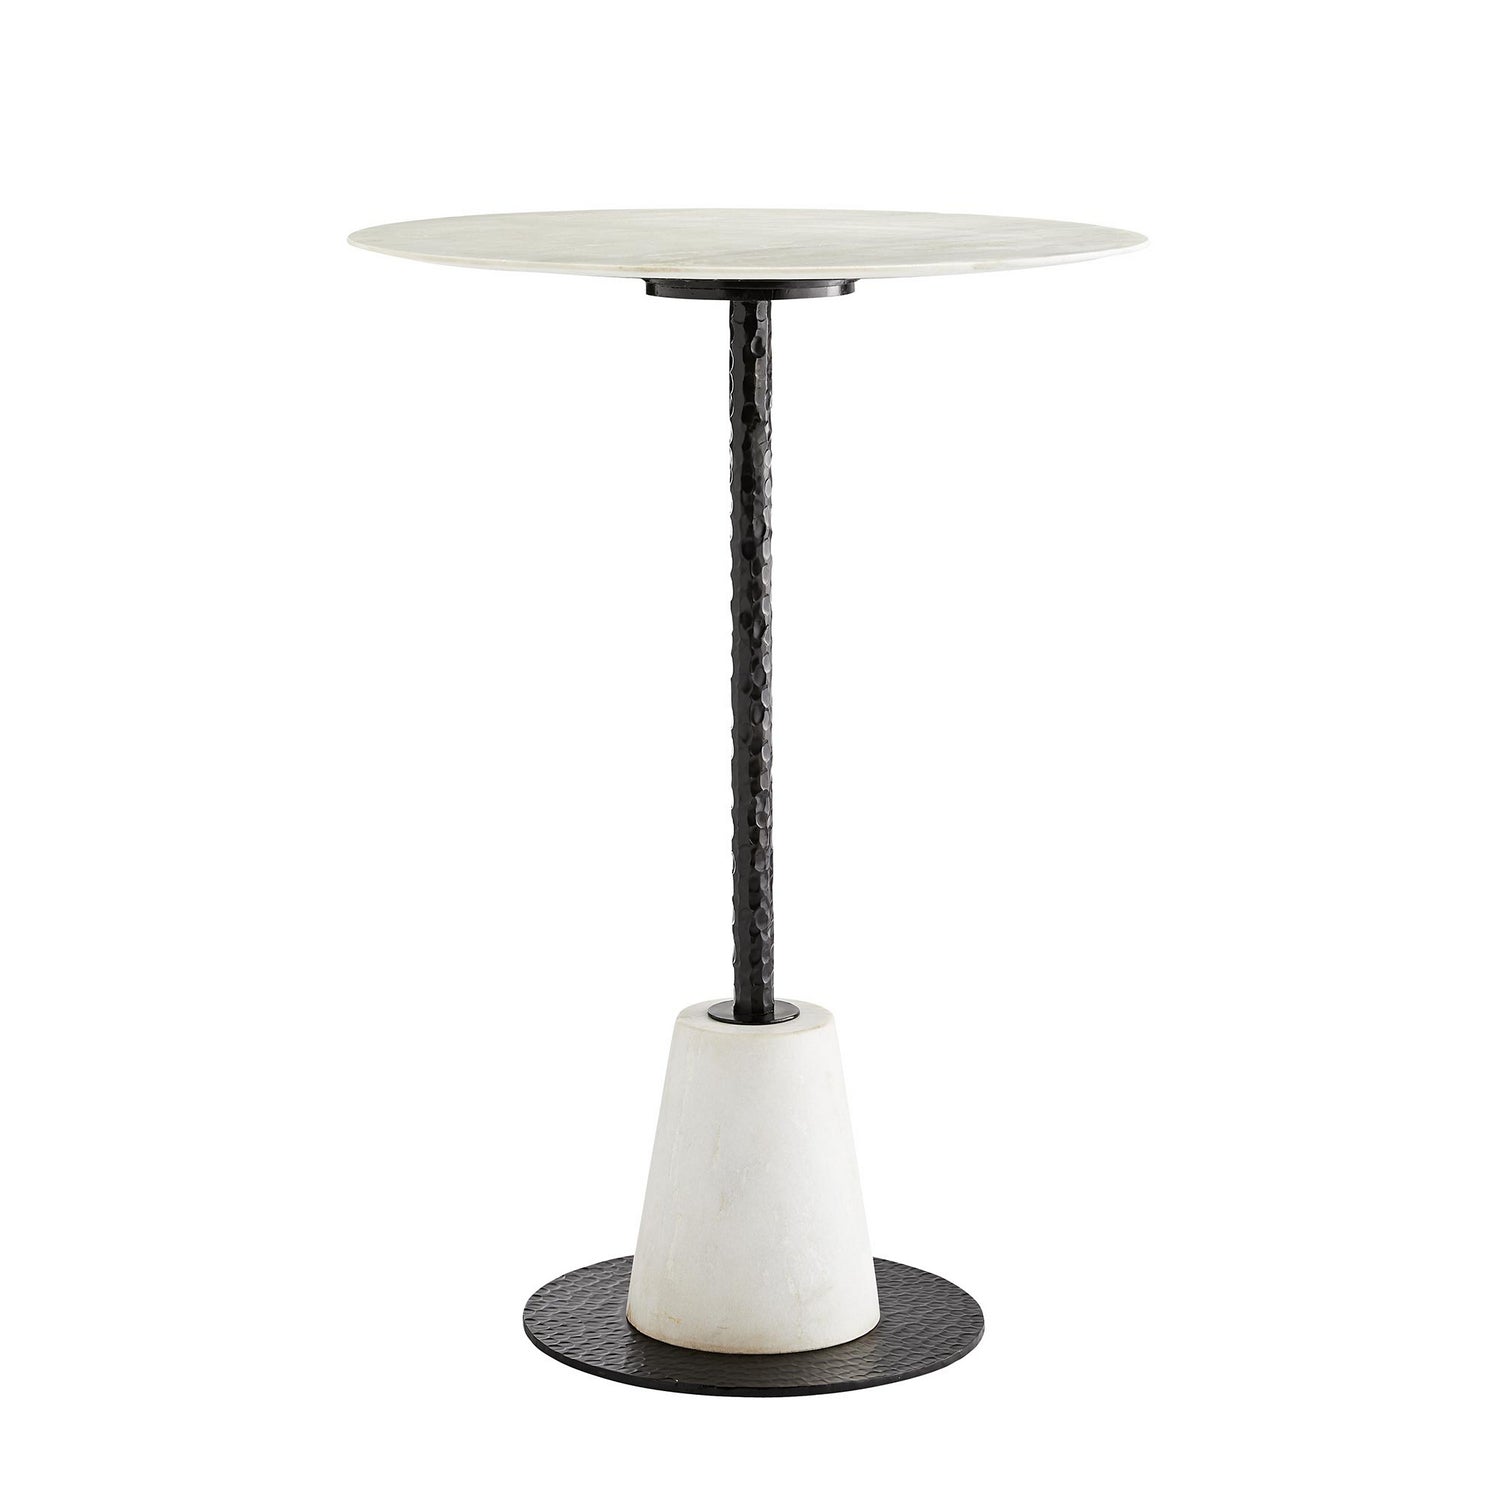 Table from the Celeste collection in White finish